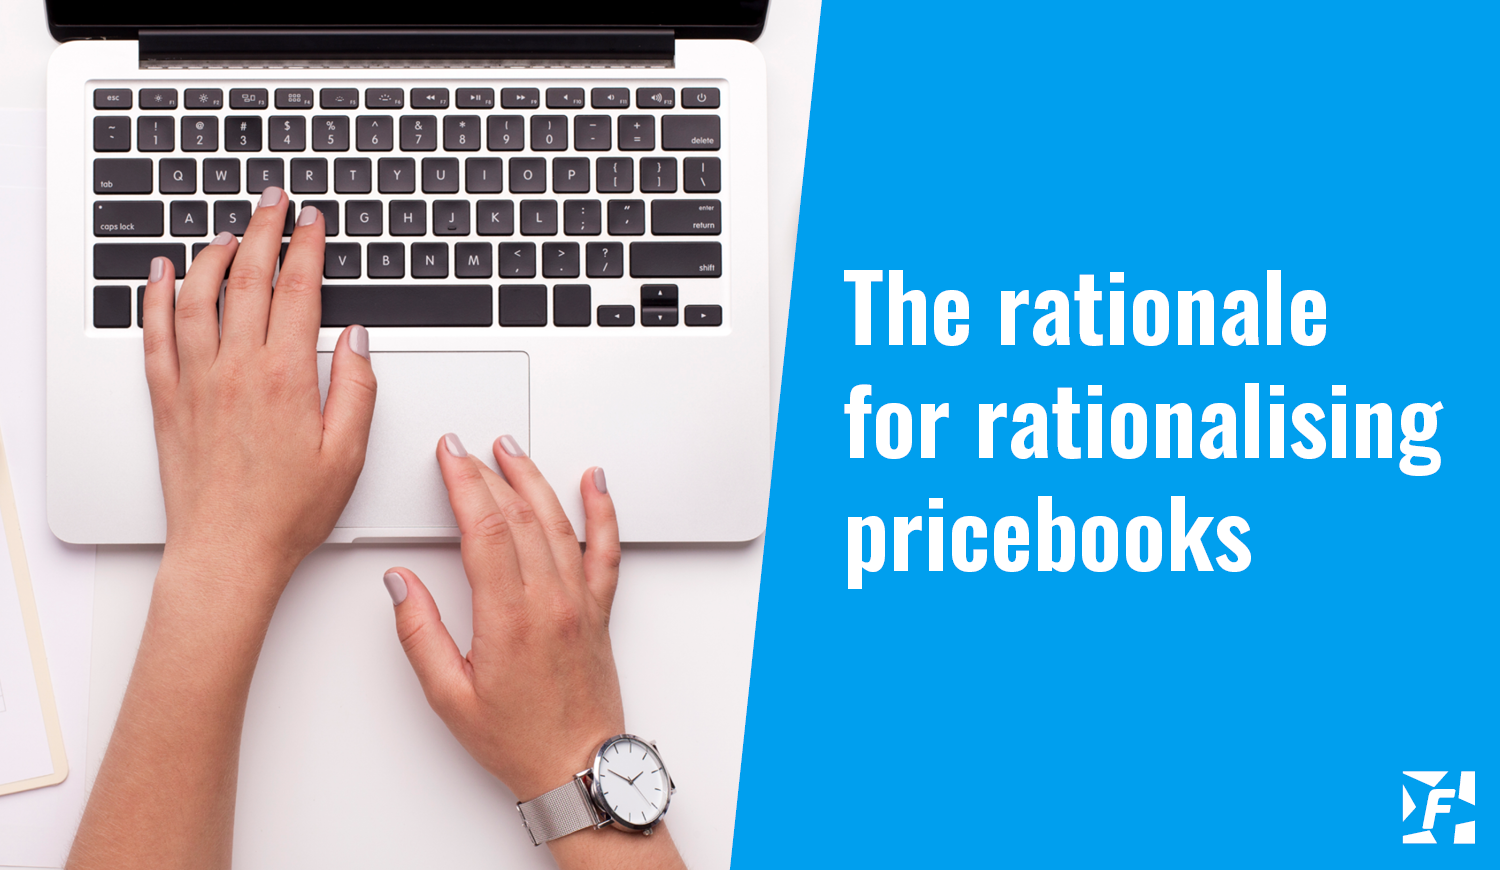 The rationale for rationalising pricebooks